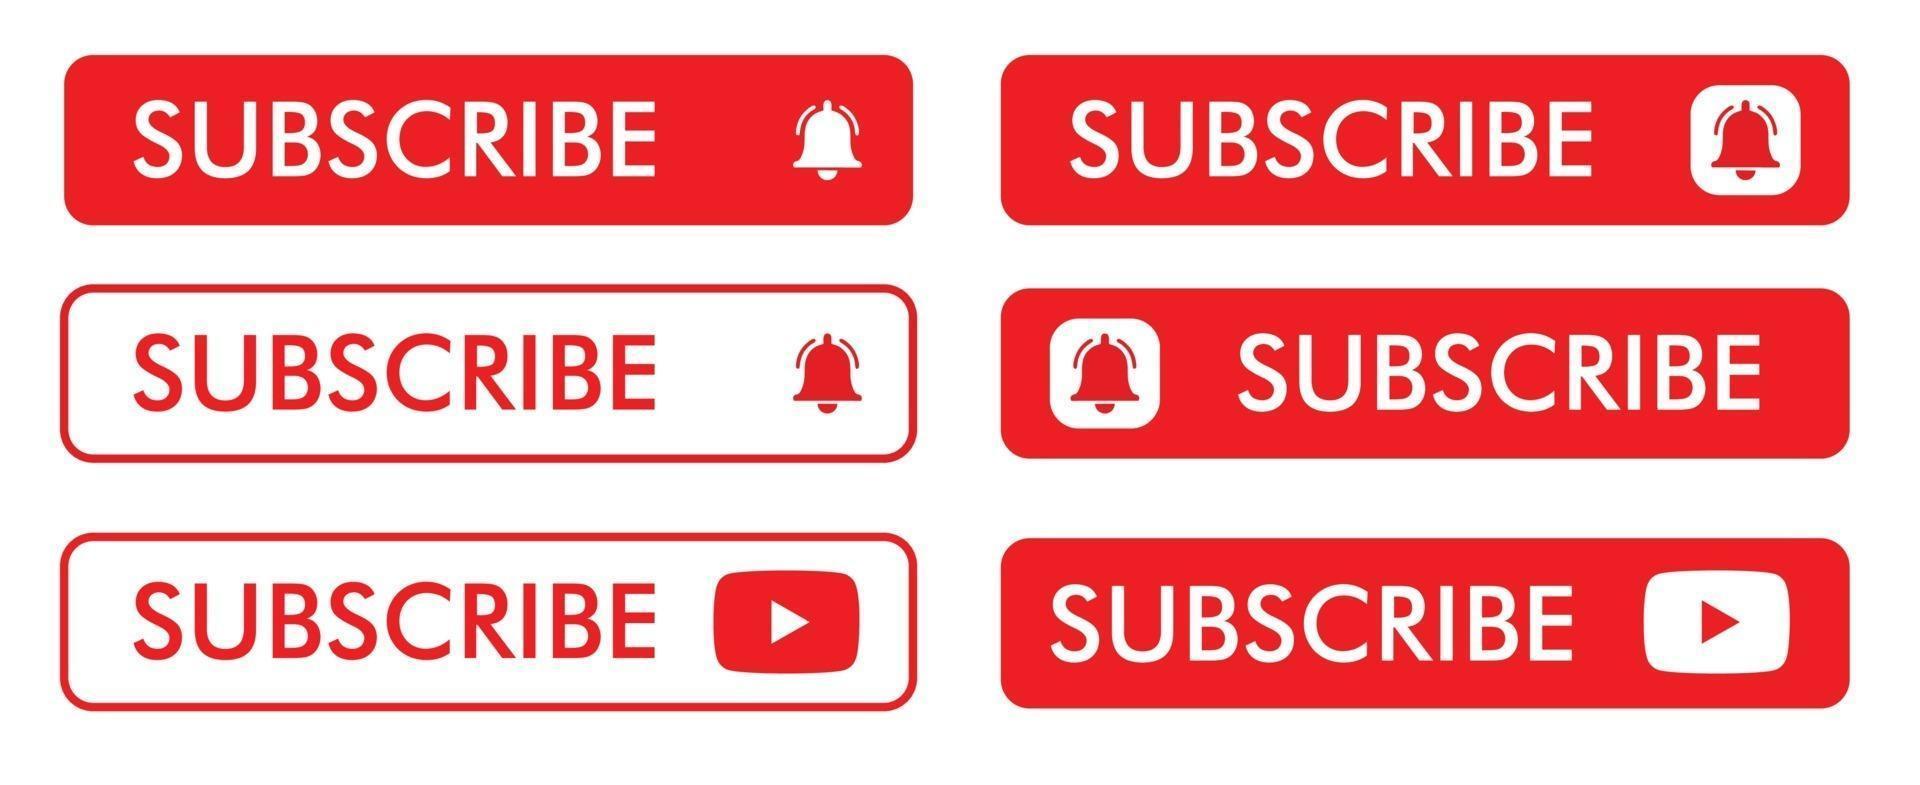 MobileSubscribe icon. Red button subscribe to channel, blog. Social media background.  Vector illustration. EPS 10